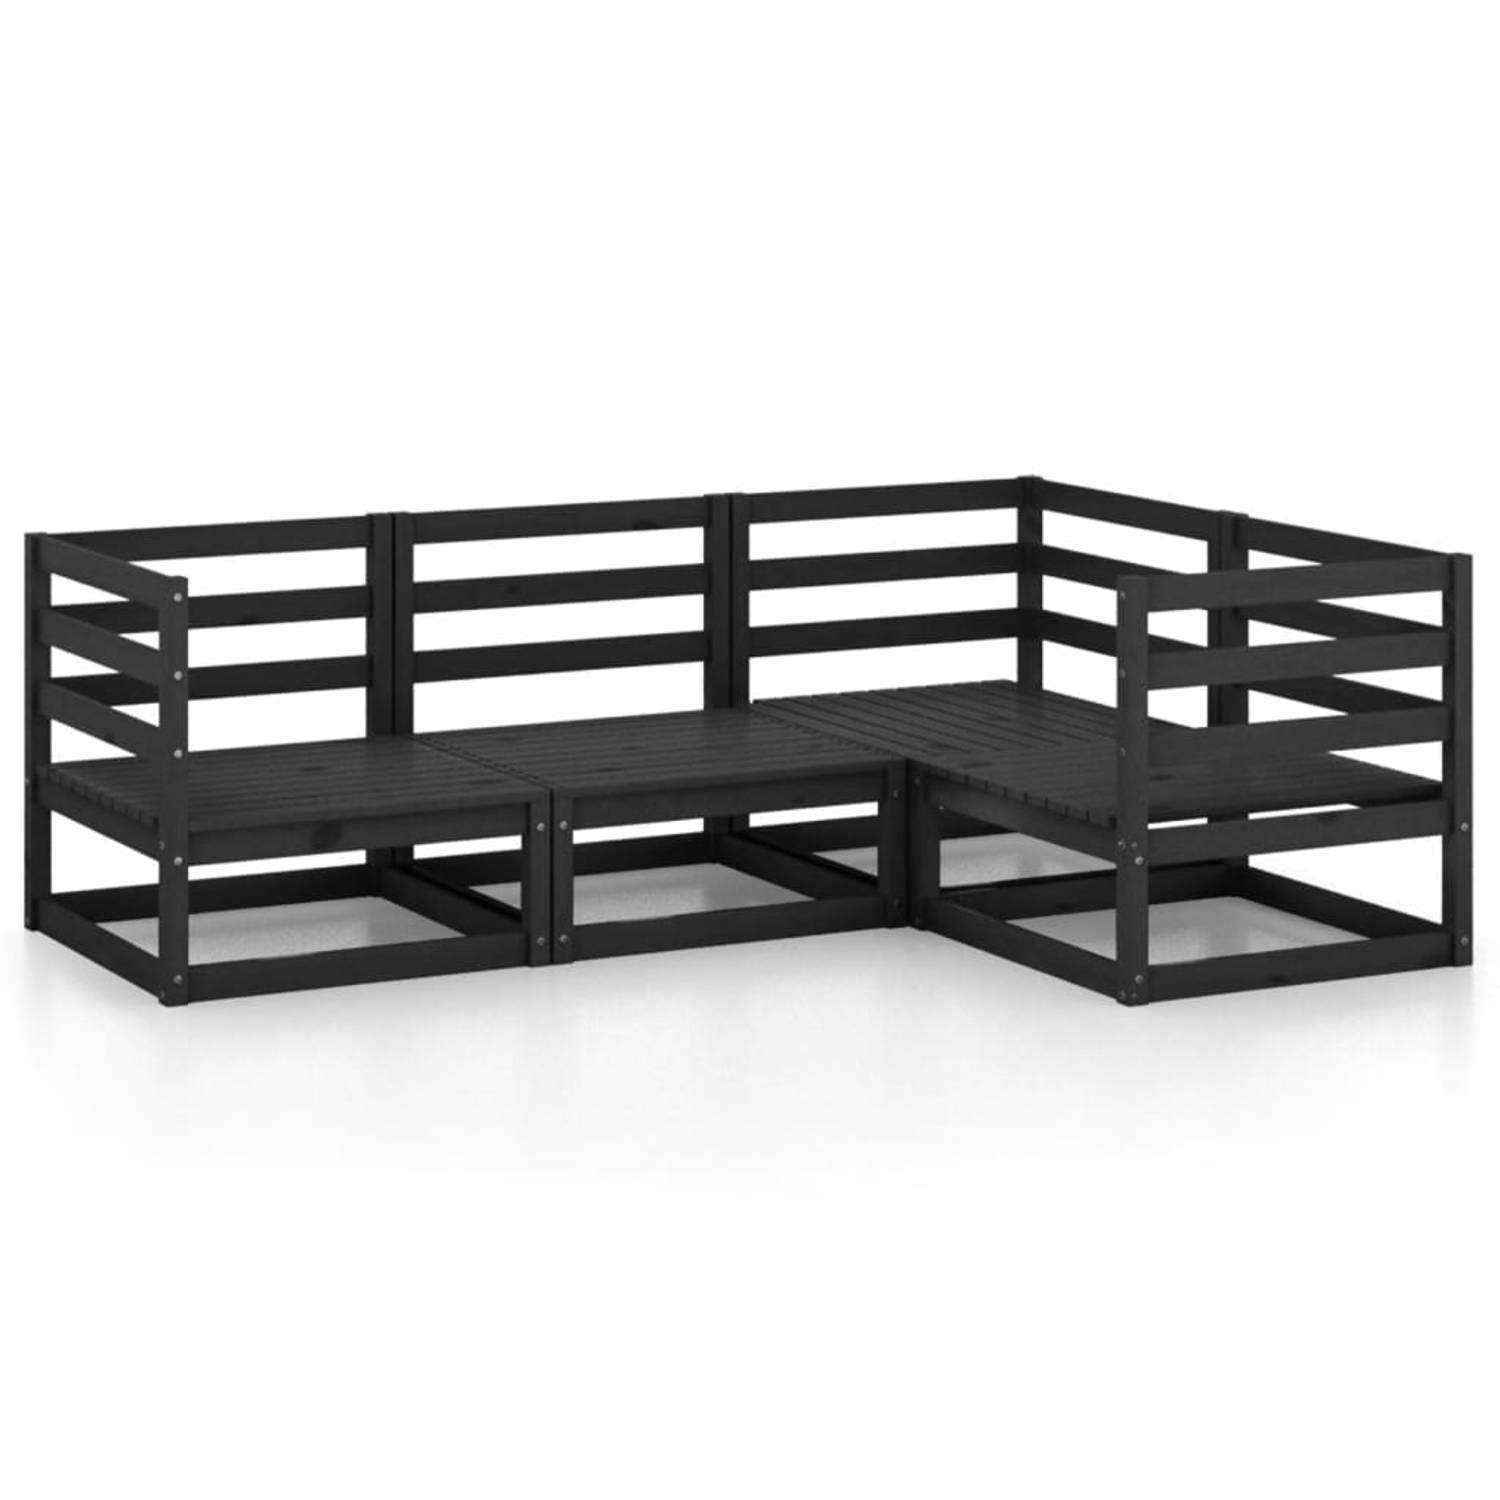 The Living Store Tuinset - s - Loungeset - 70 x 70 x 67 cm - Massief grenenhout